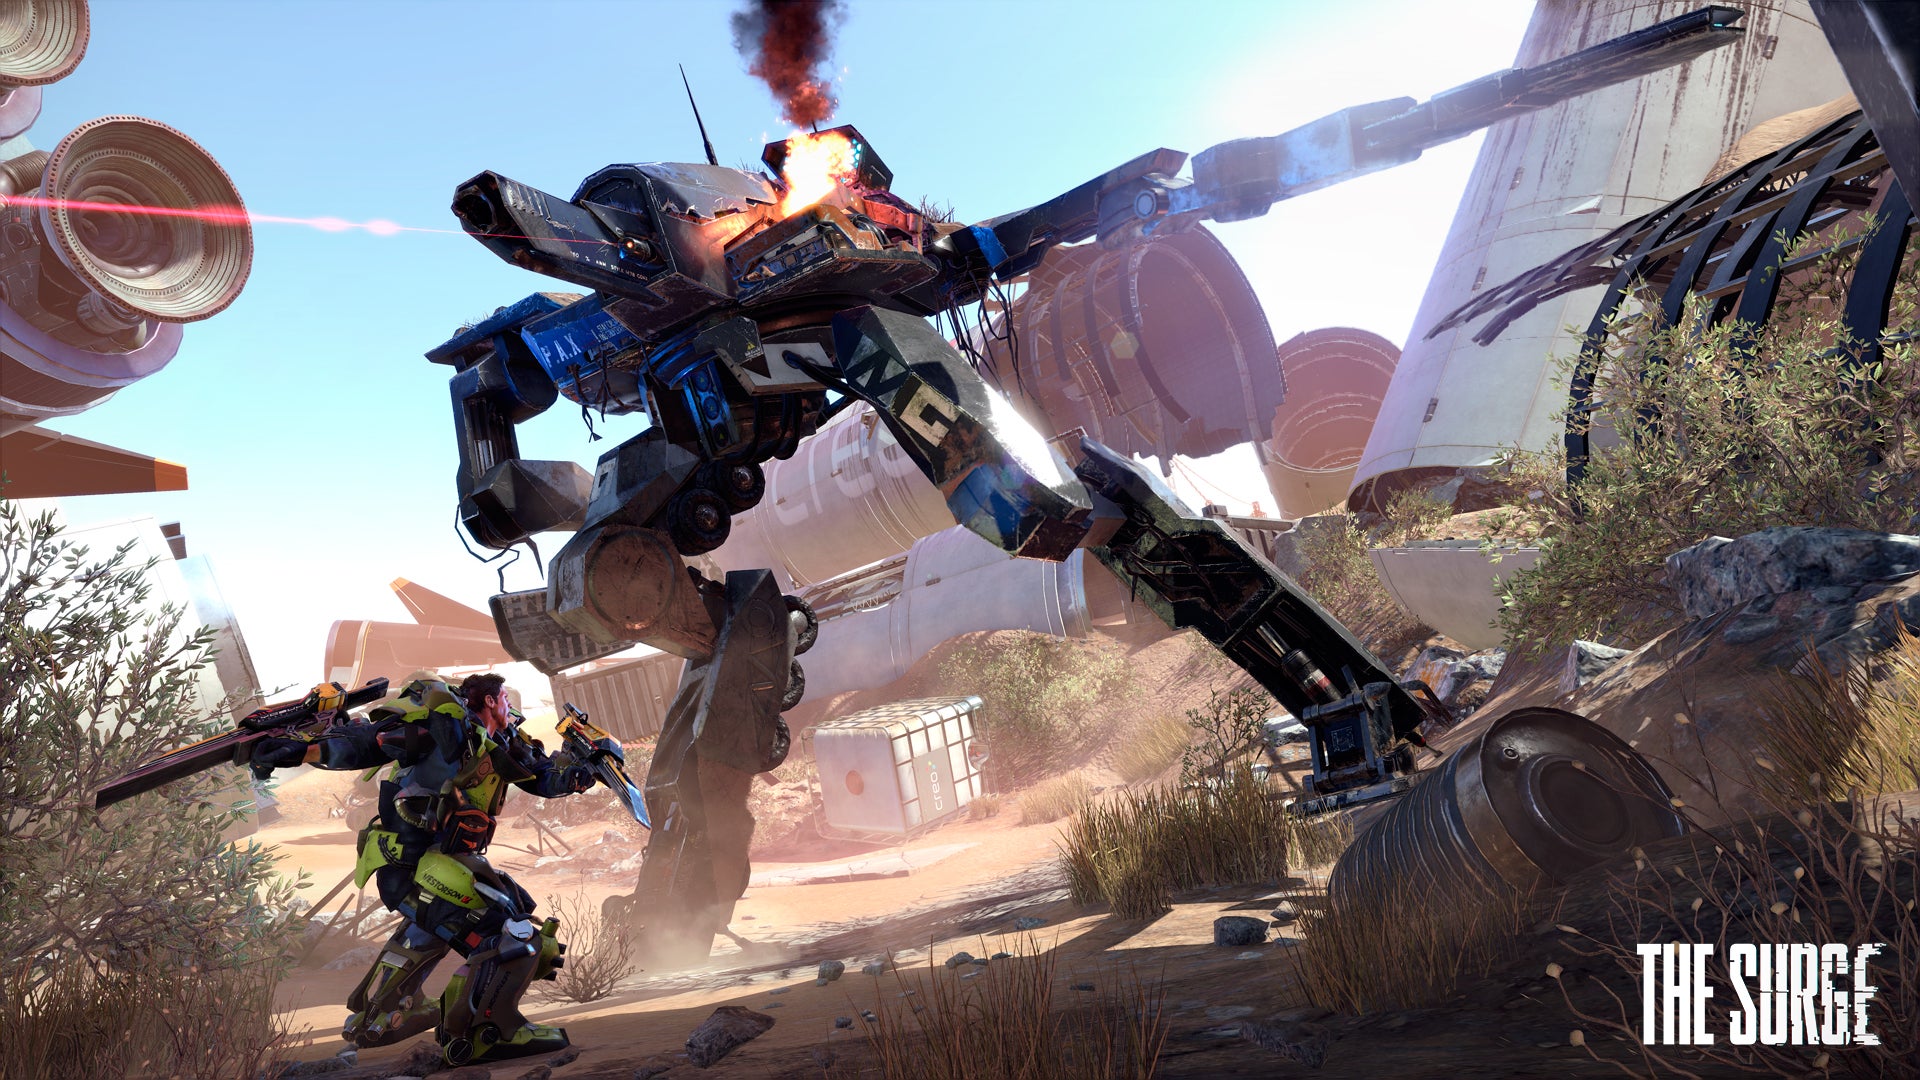 Image for Jelly Deals: The Surge is down to £13.95 on PS4 and Xbox One today